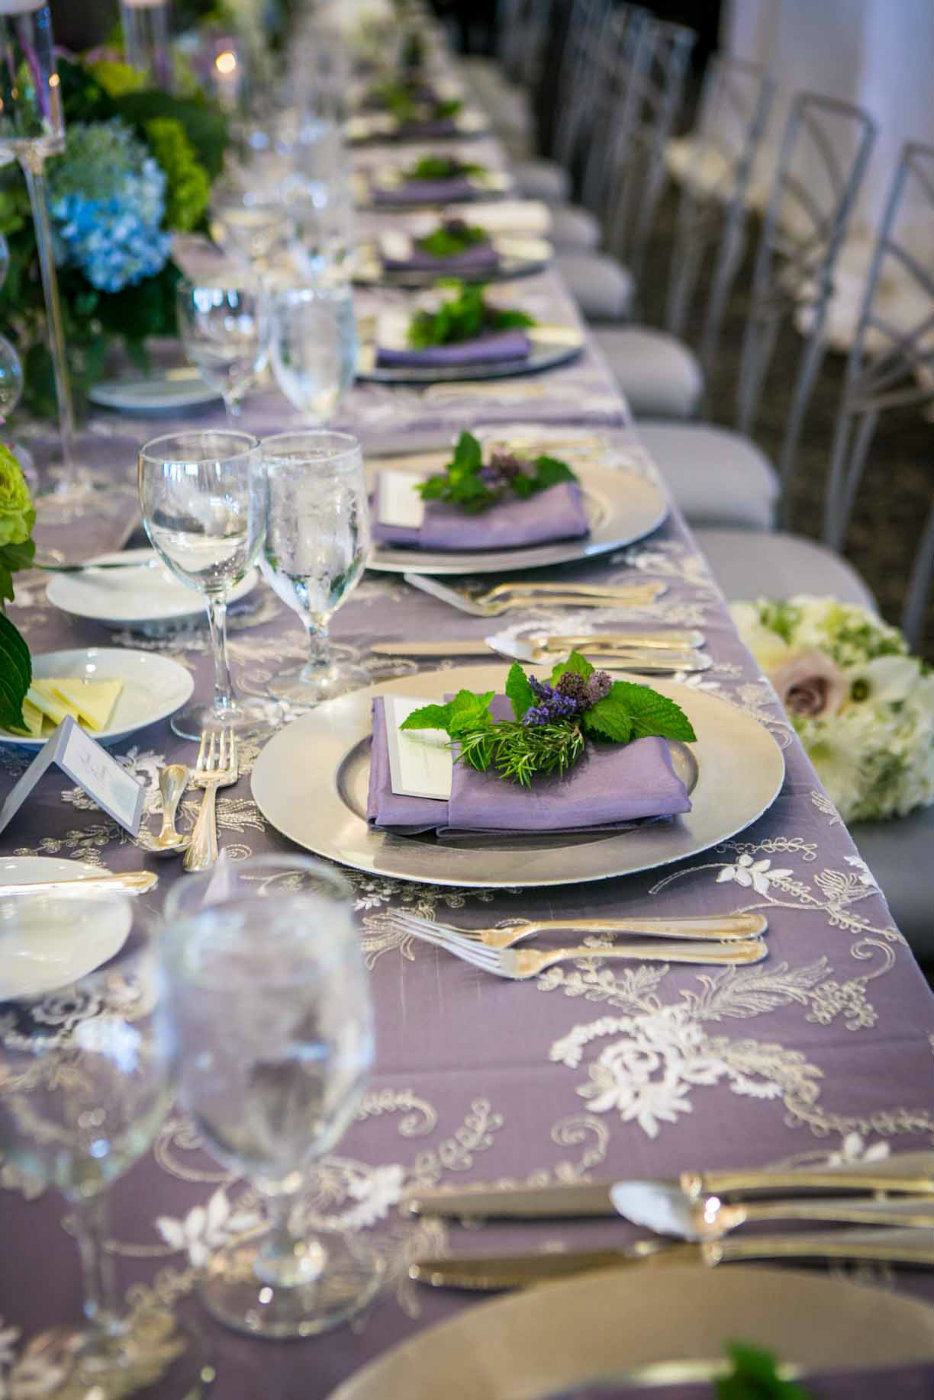 place setting with silver charger plates, puple napkins, lace linens, and greenery on each napkin